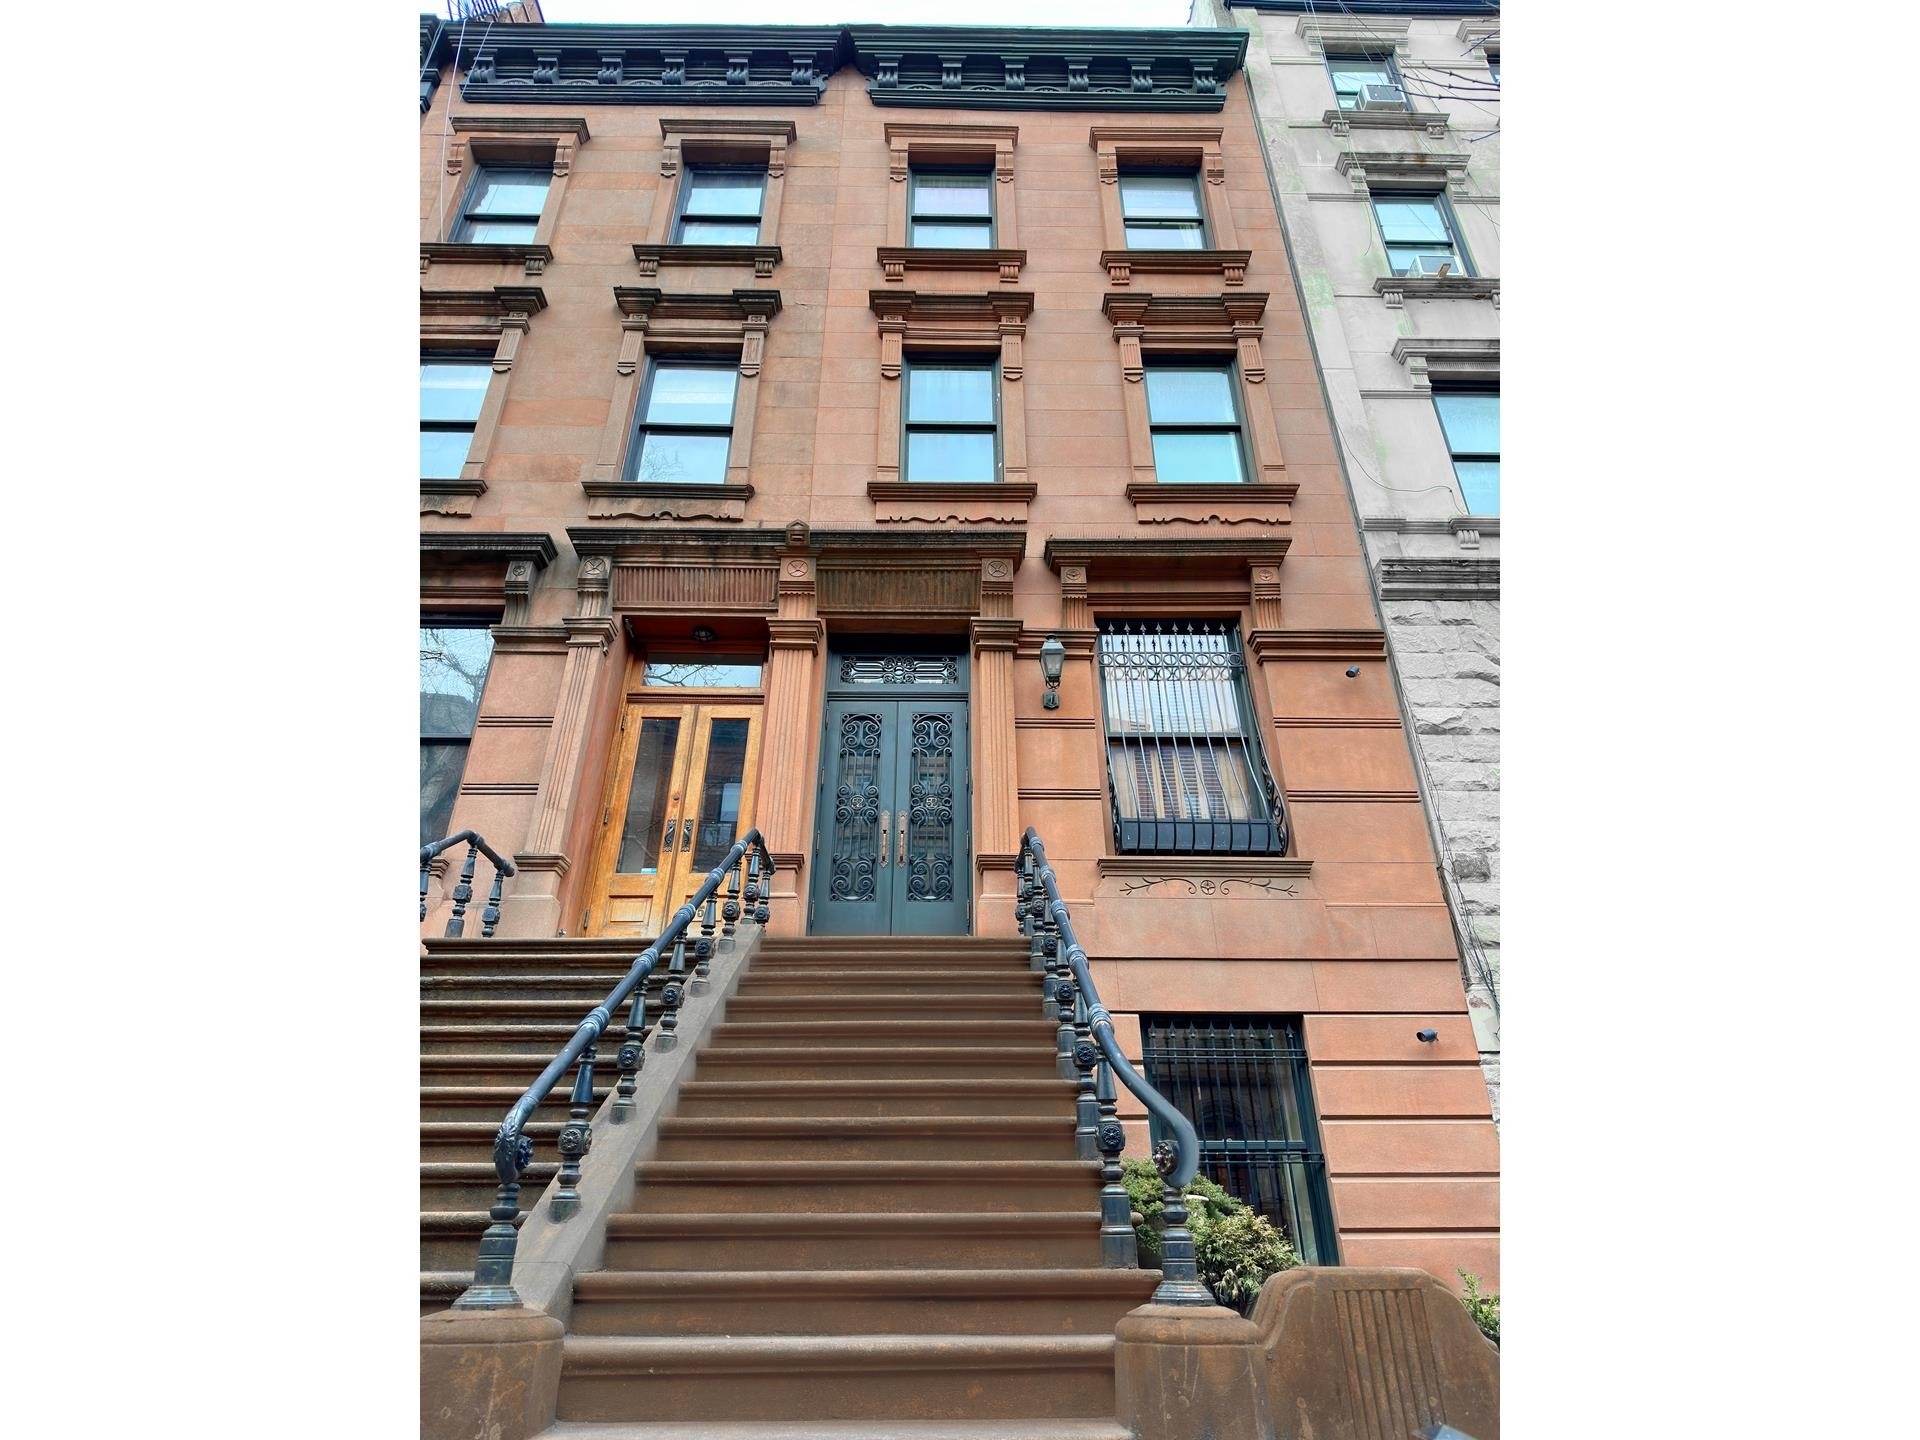 Single Family Townhouse for Sale at 52 W 84TH ST, TOWNHOUSE Upper West Side, New York, New York 10024